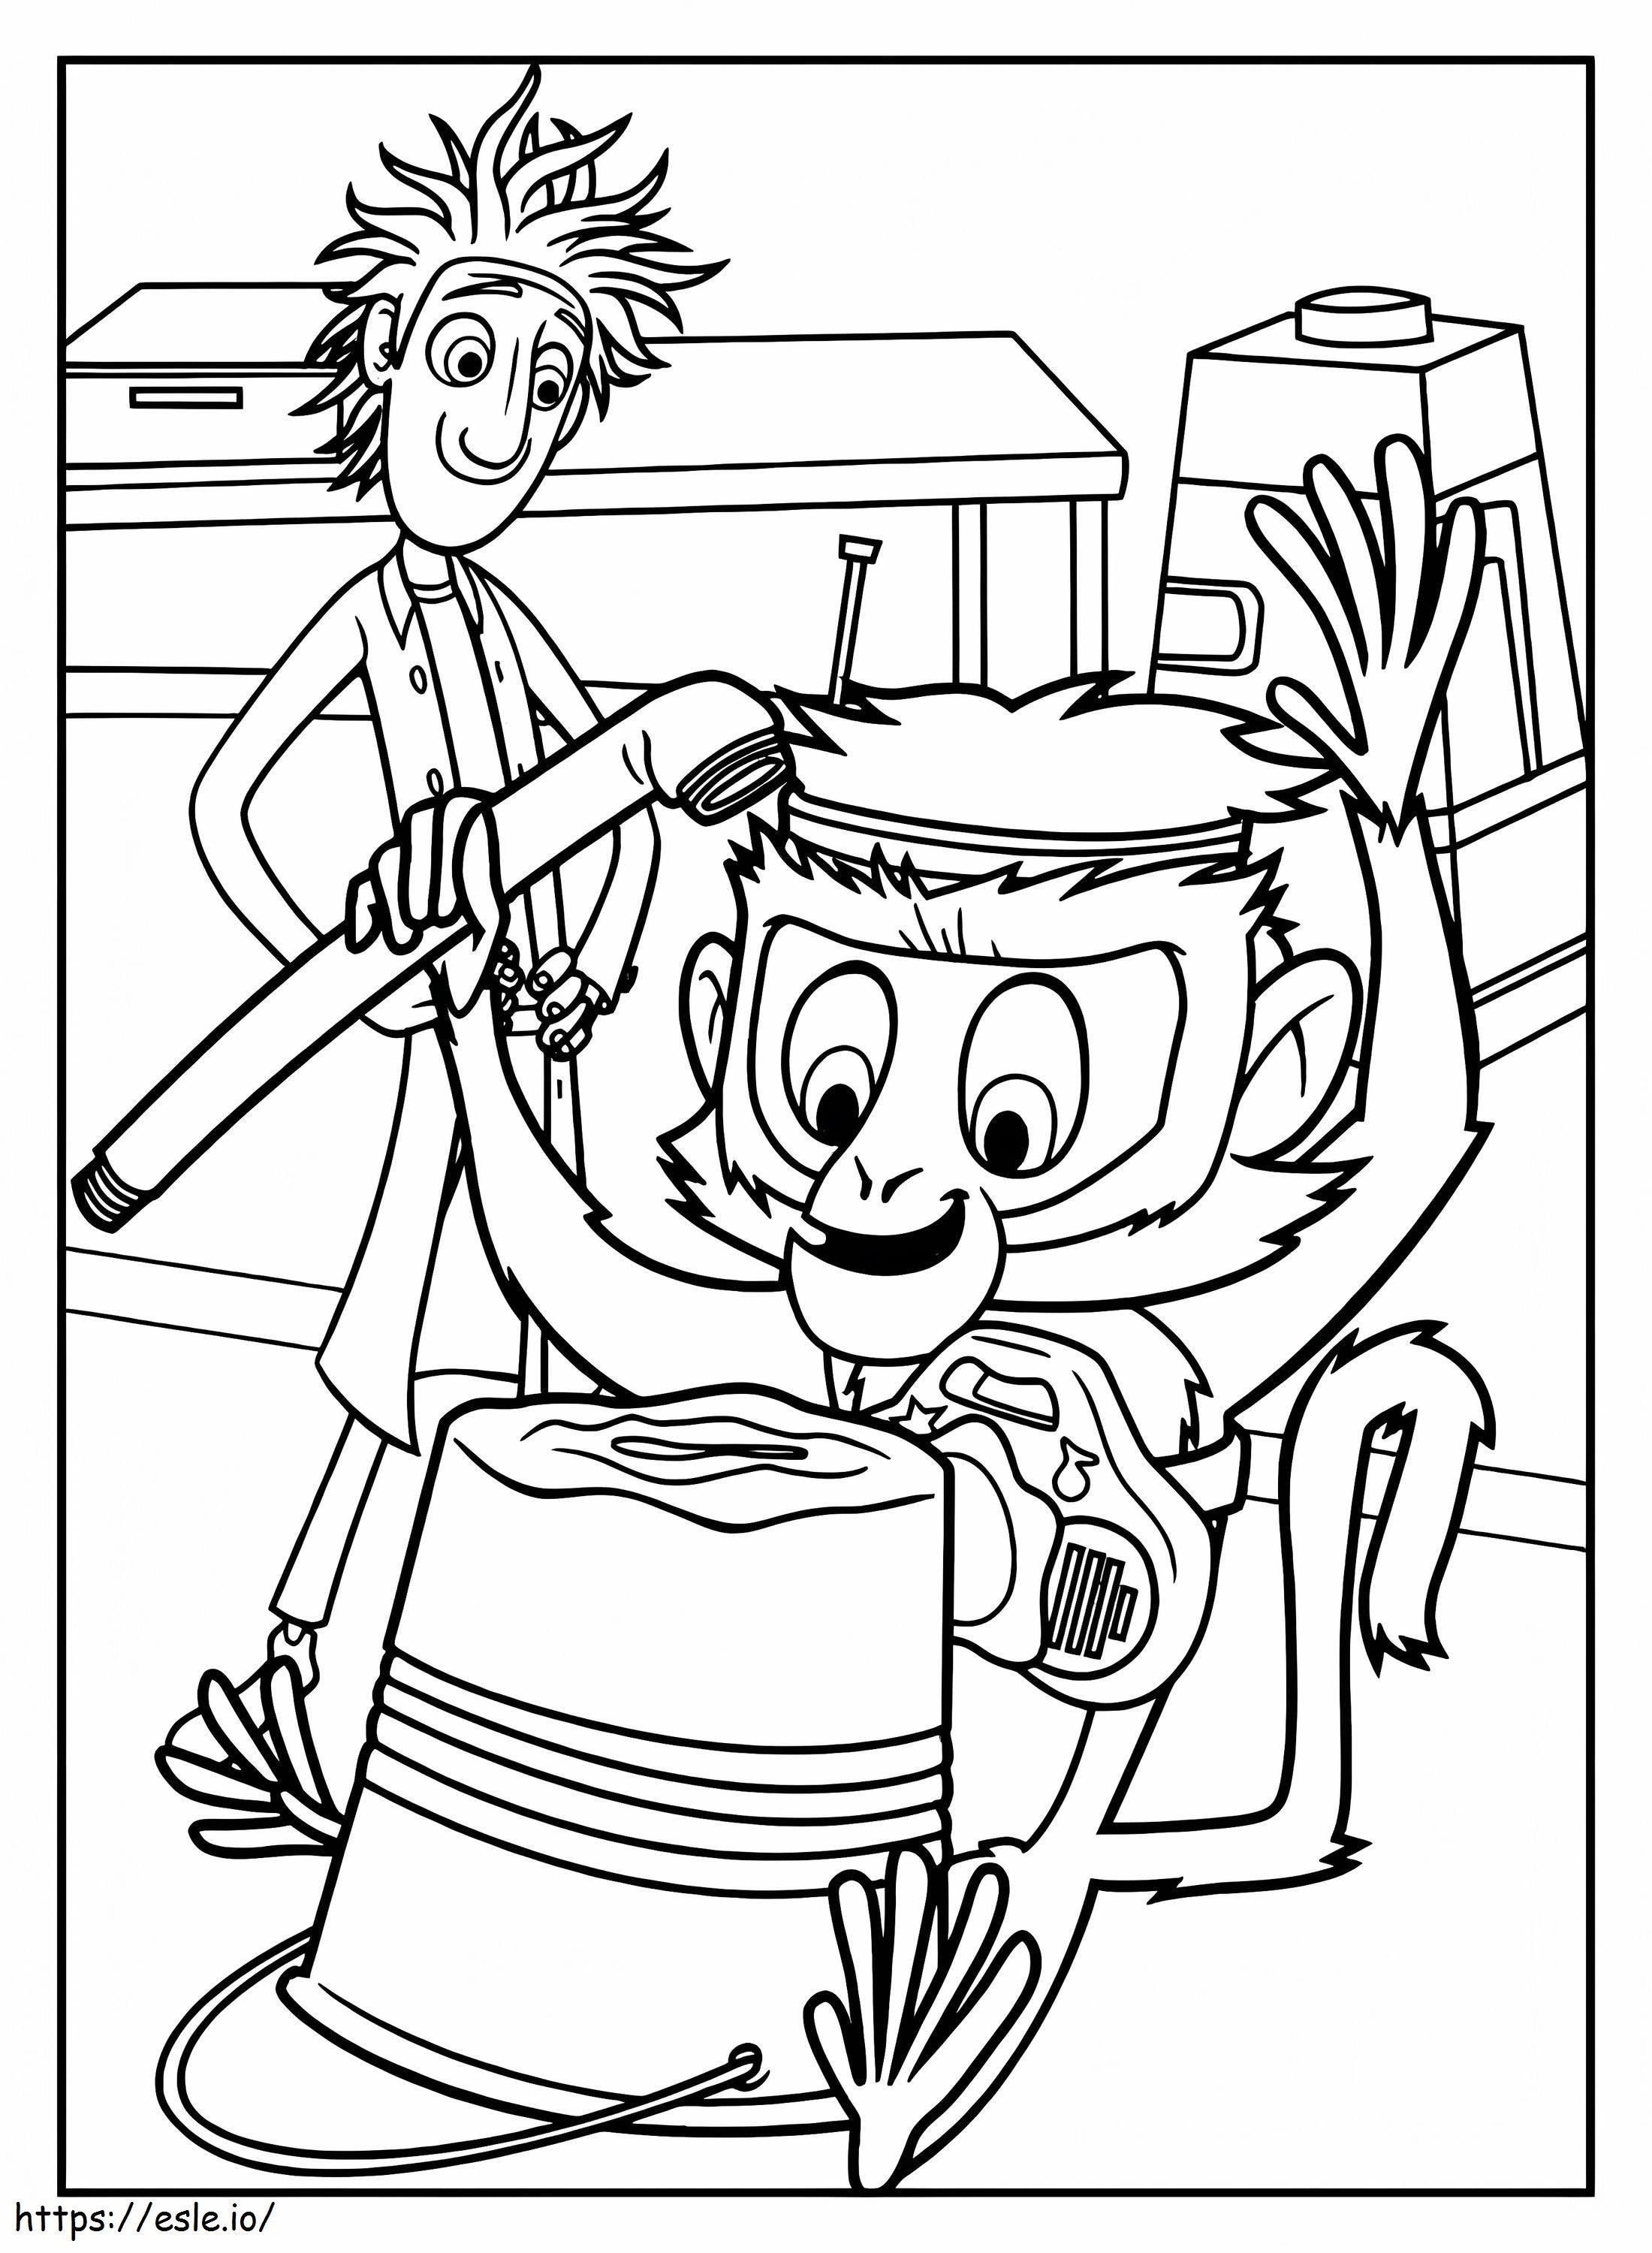 Flint Lockwood And Steve coloring page